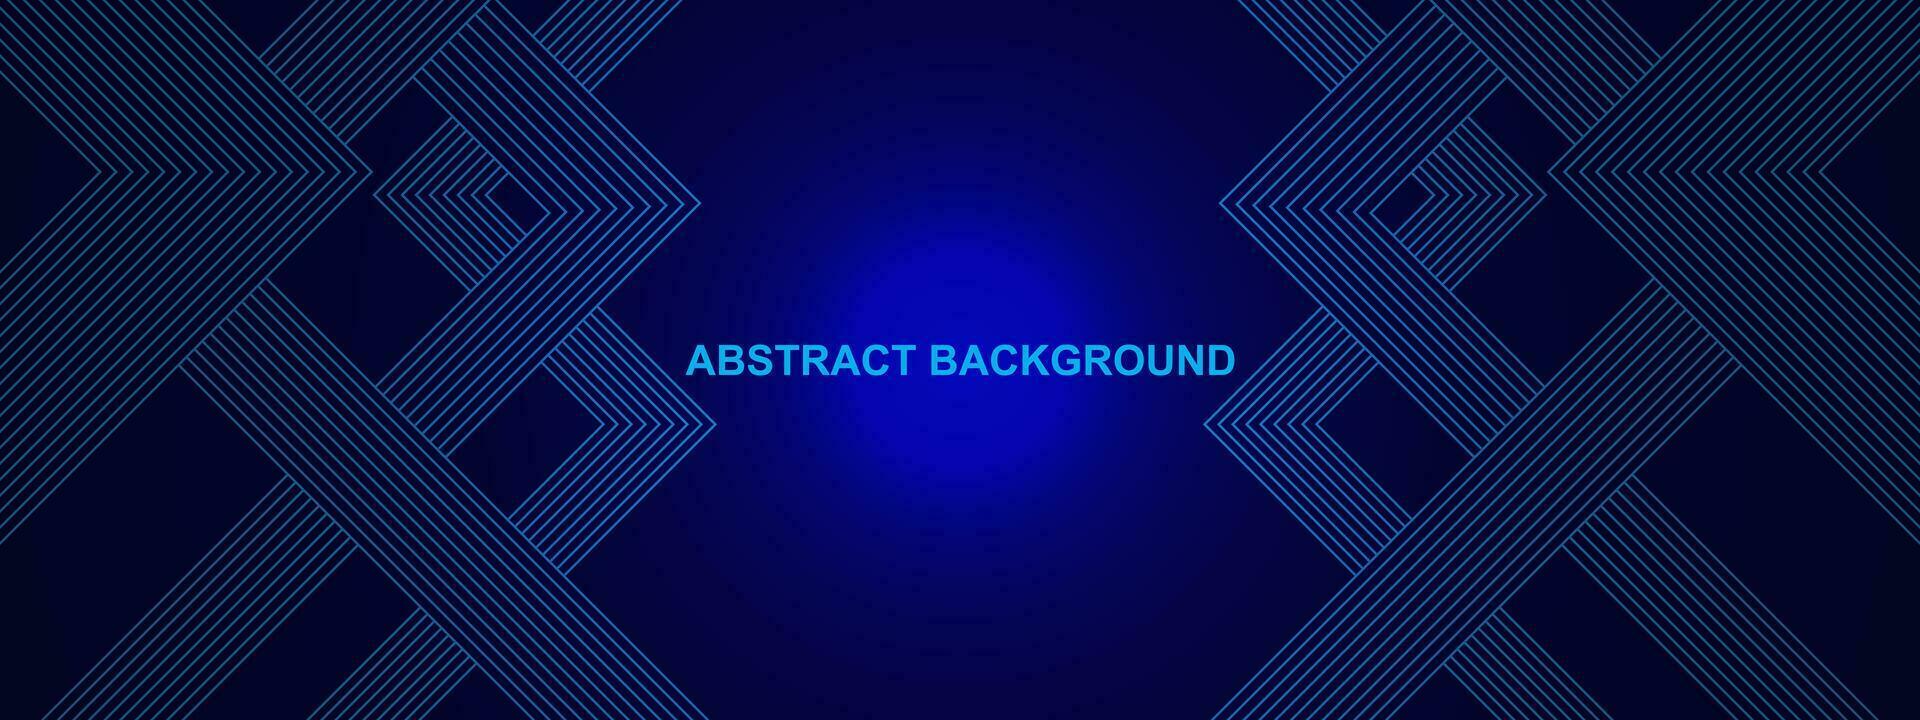 Abstract header background with blue lines for modern technology and science design concept. Vector illustration.